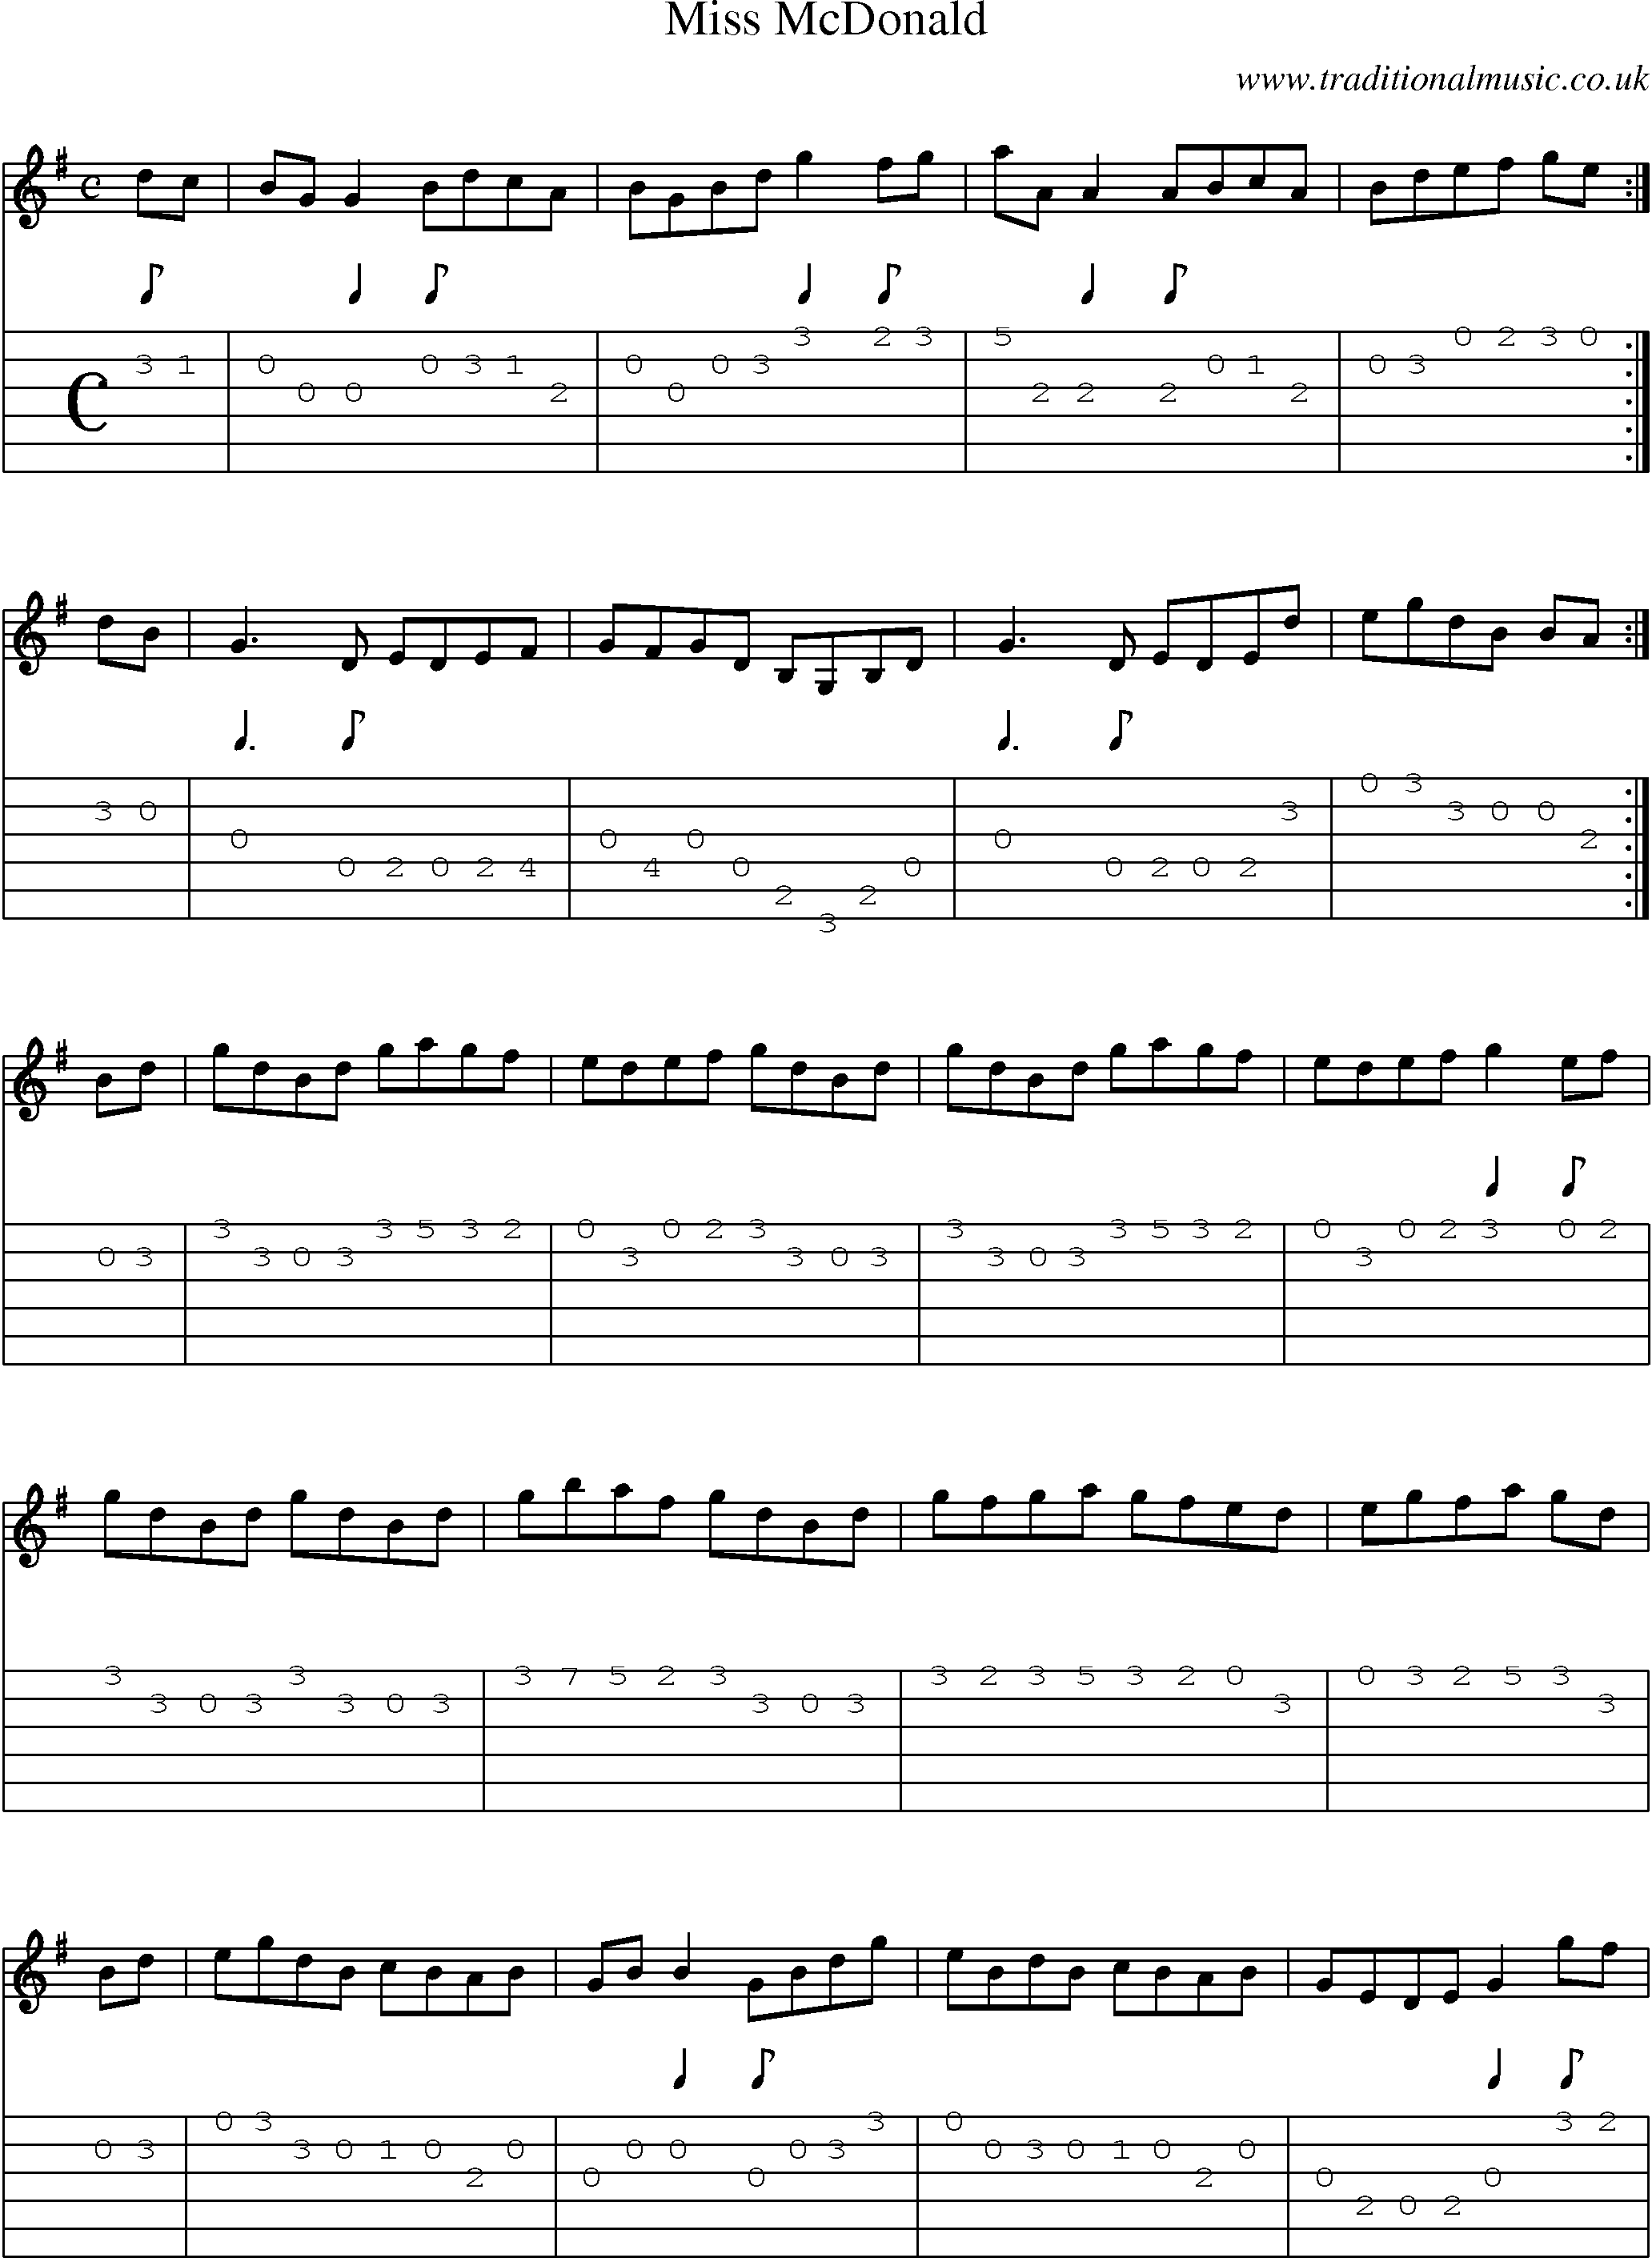 Music Score and Guitar Tabs for Miss Mcdonald